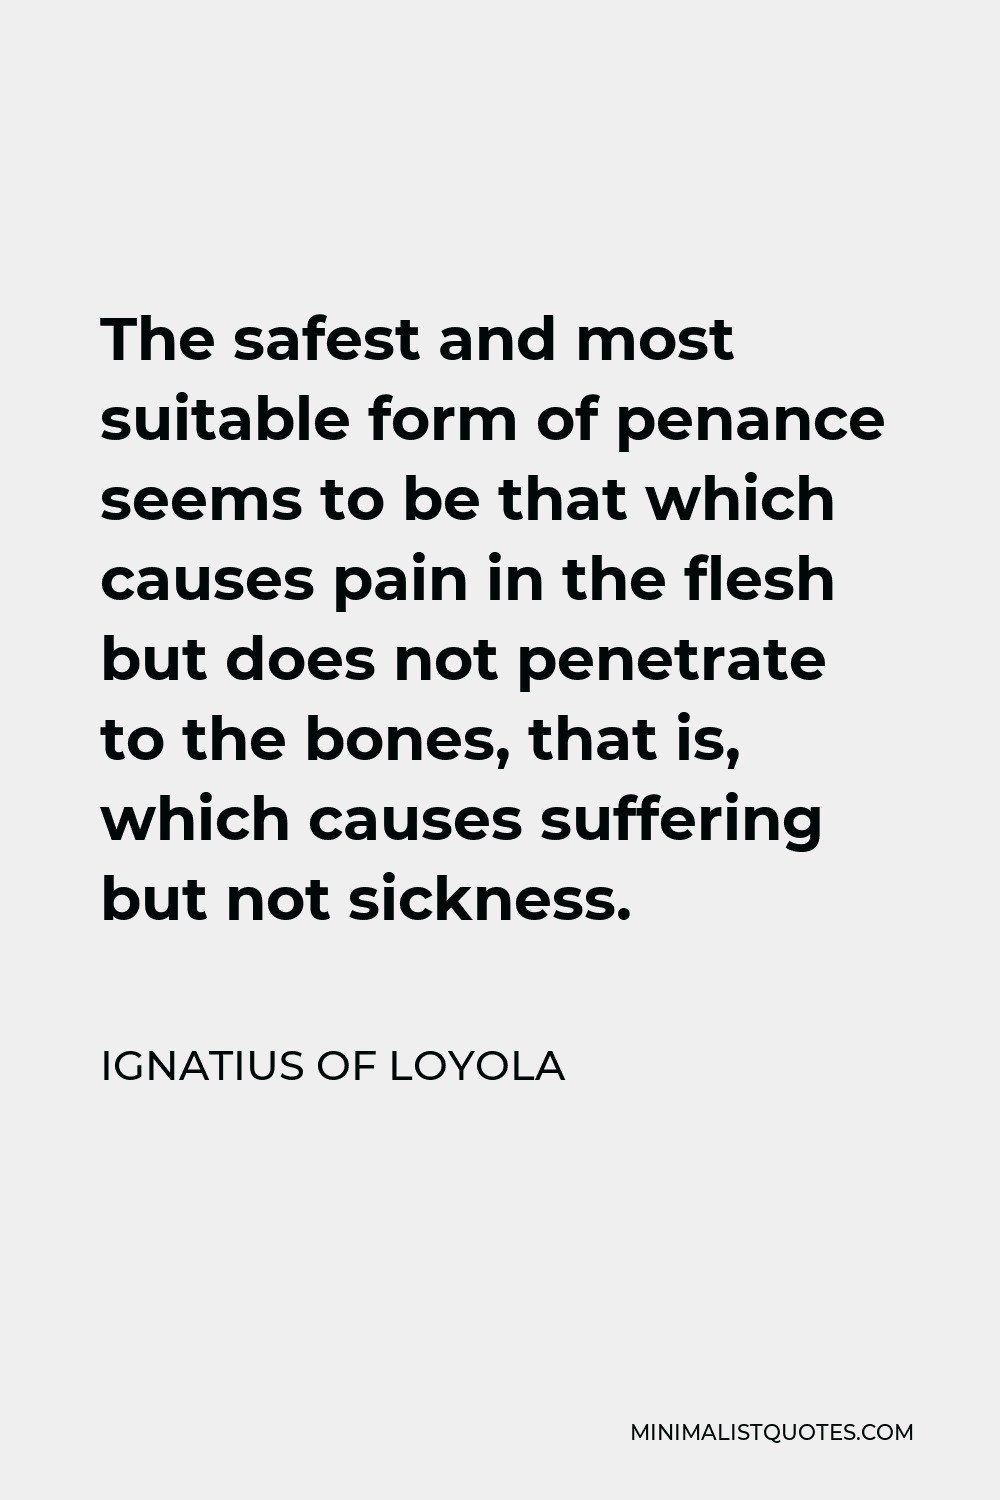 Ignatius of Loyola Quote - The safest and most suitable form of penance seems to be that which causes pain in the flesh but does not penetrate to the bones, that is, which causes suffering but not sickness.